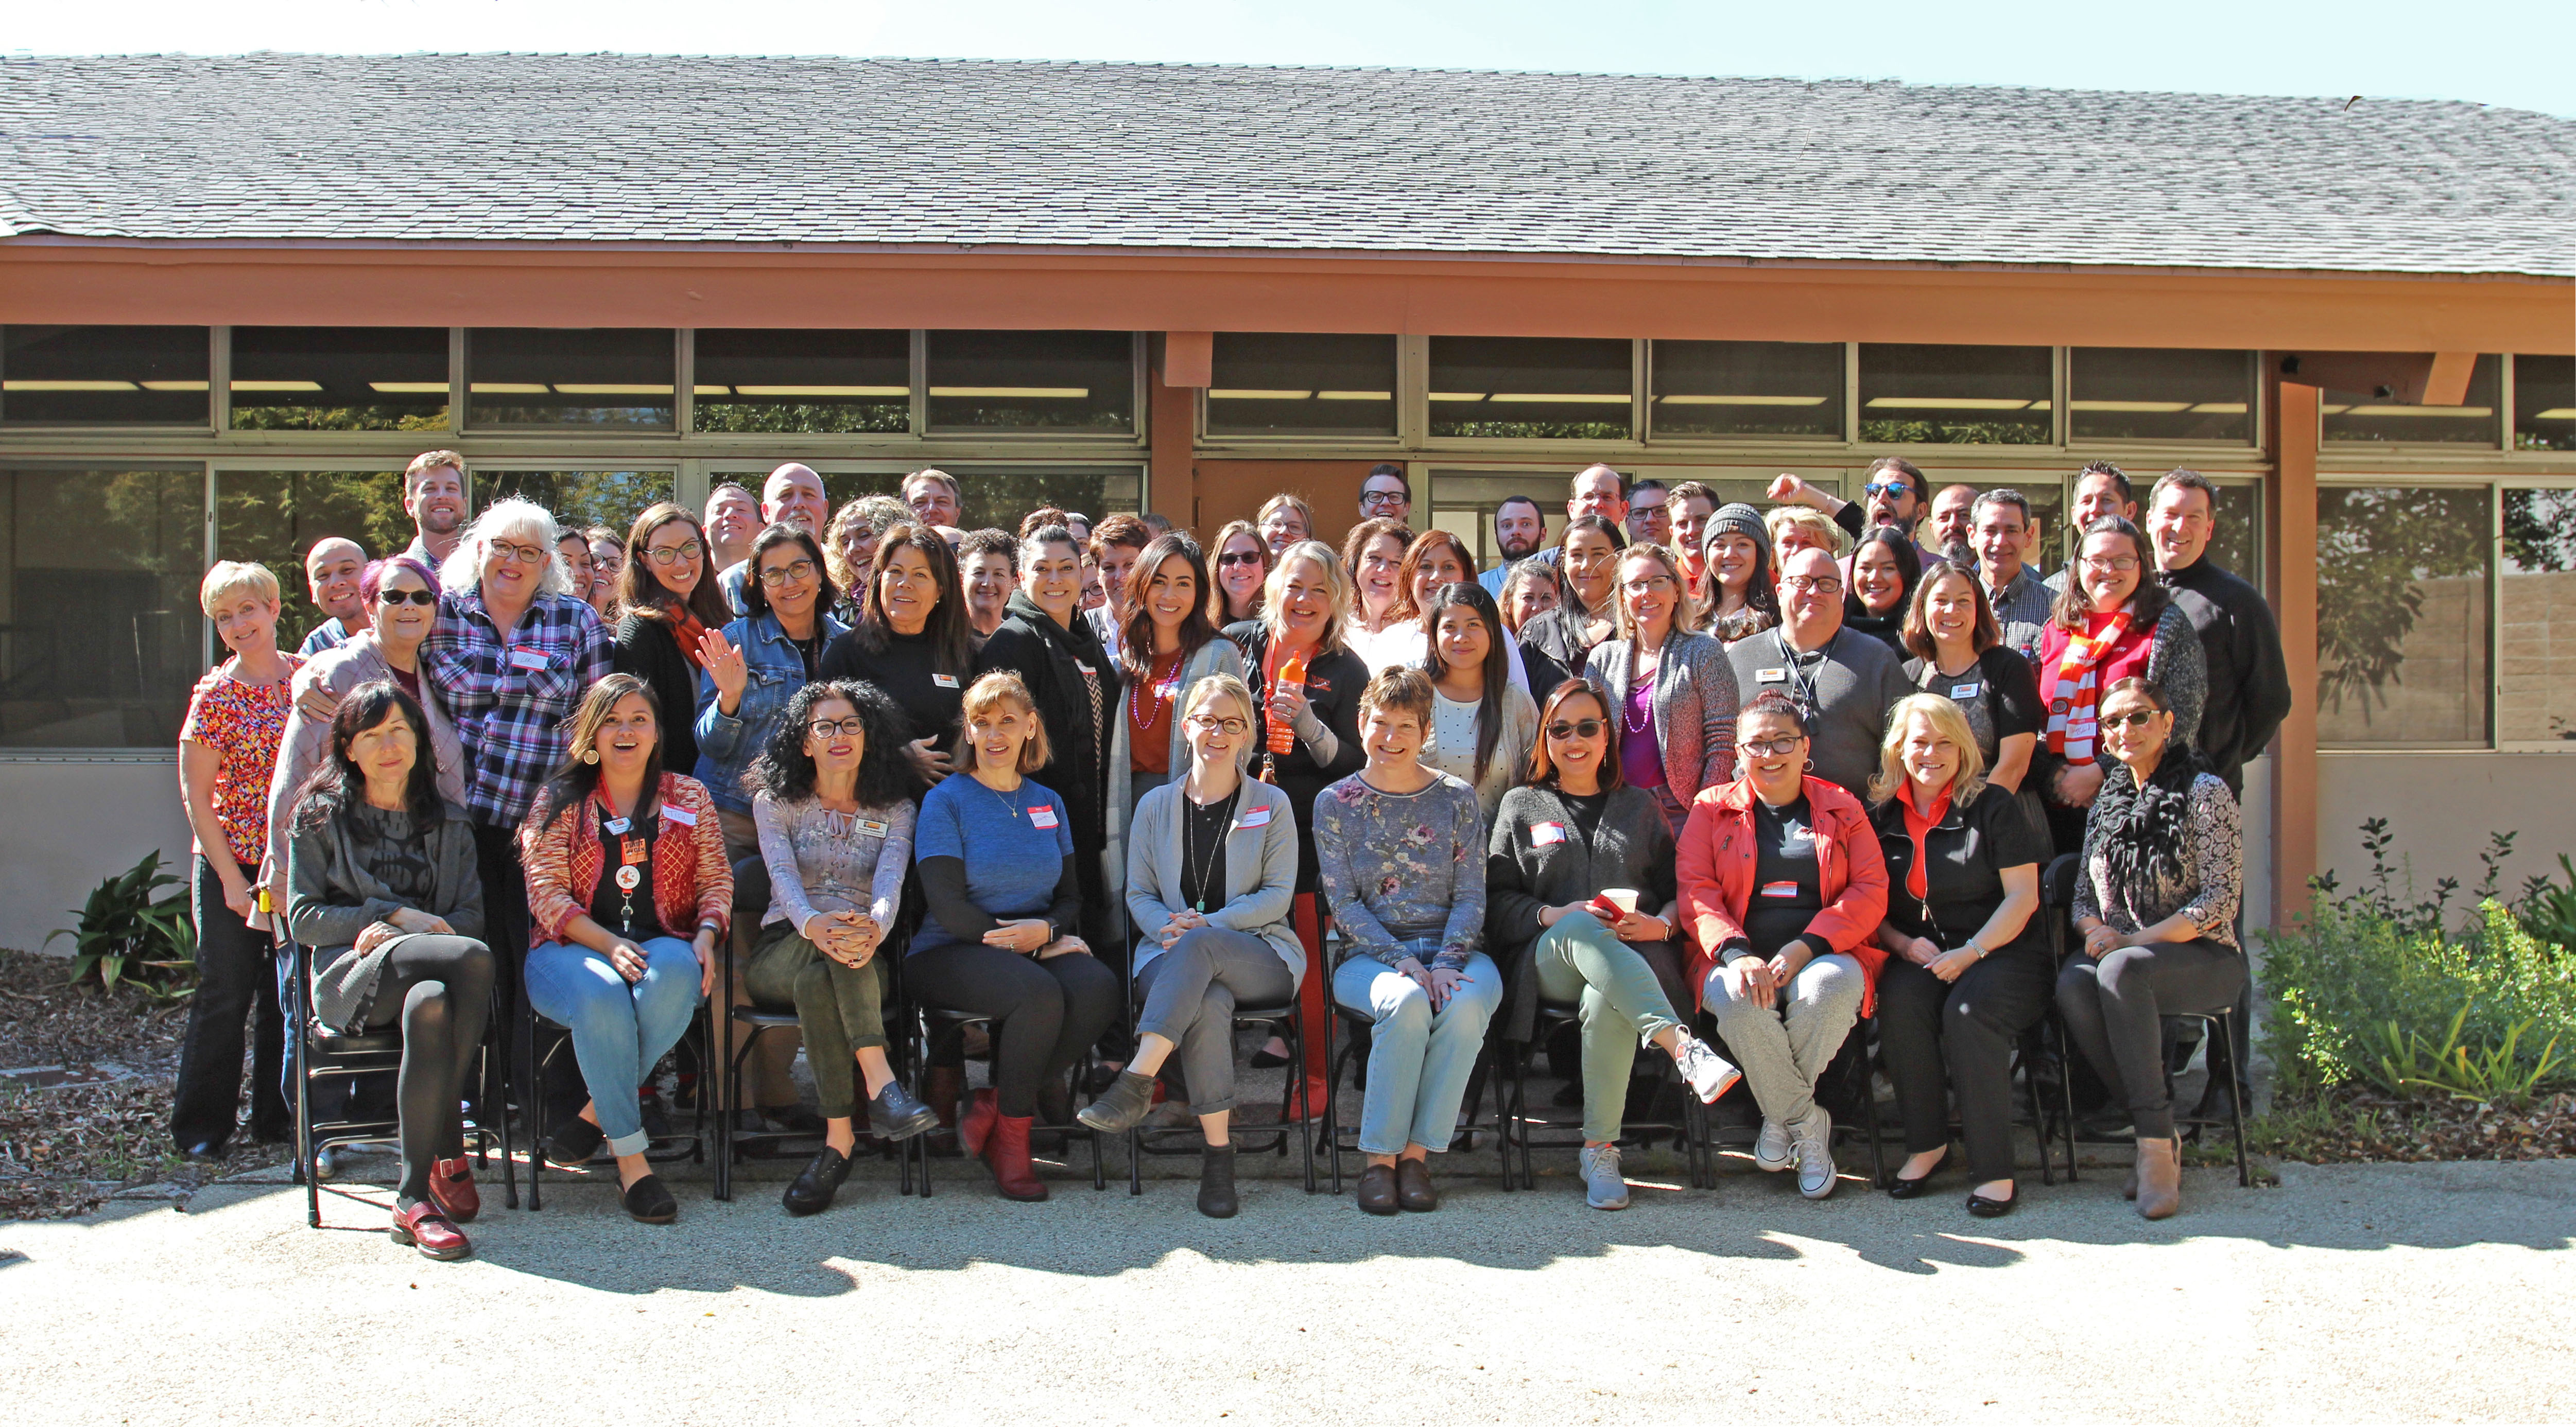 Group Photo of Ventura College staff at college wide even in the patio of Wright Event Center. The sun is shinning.